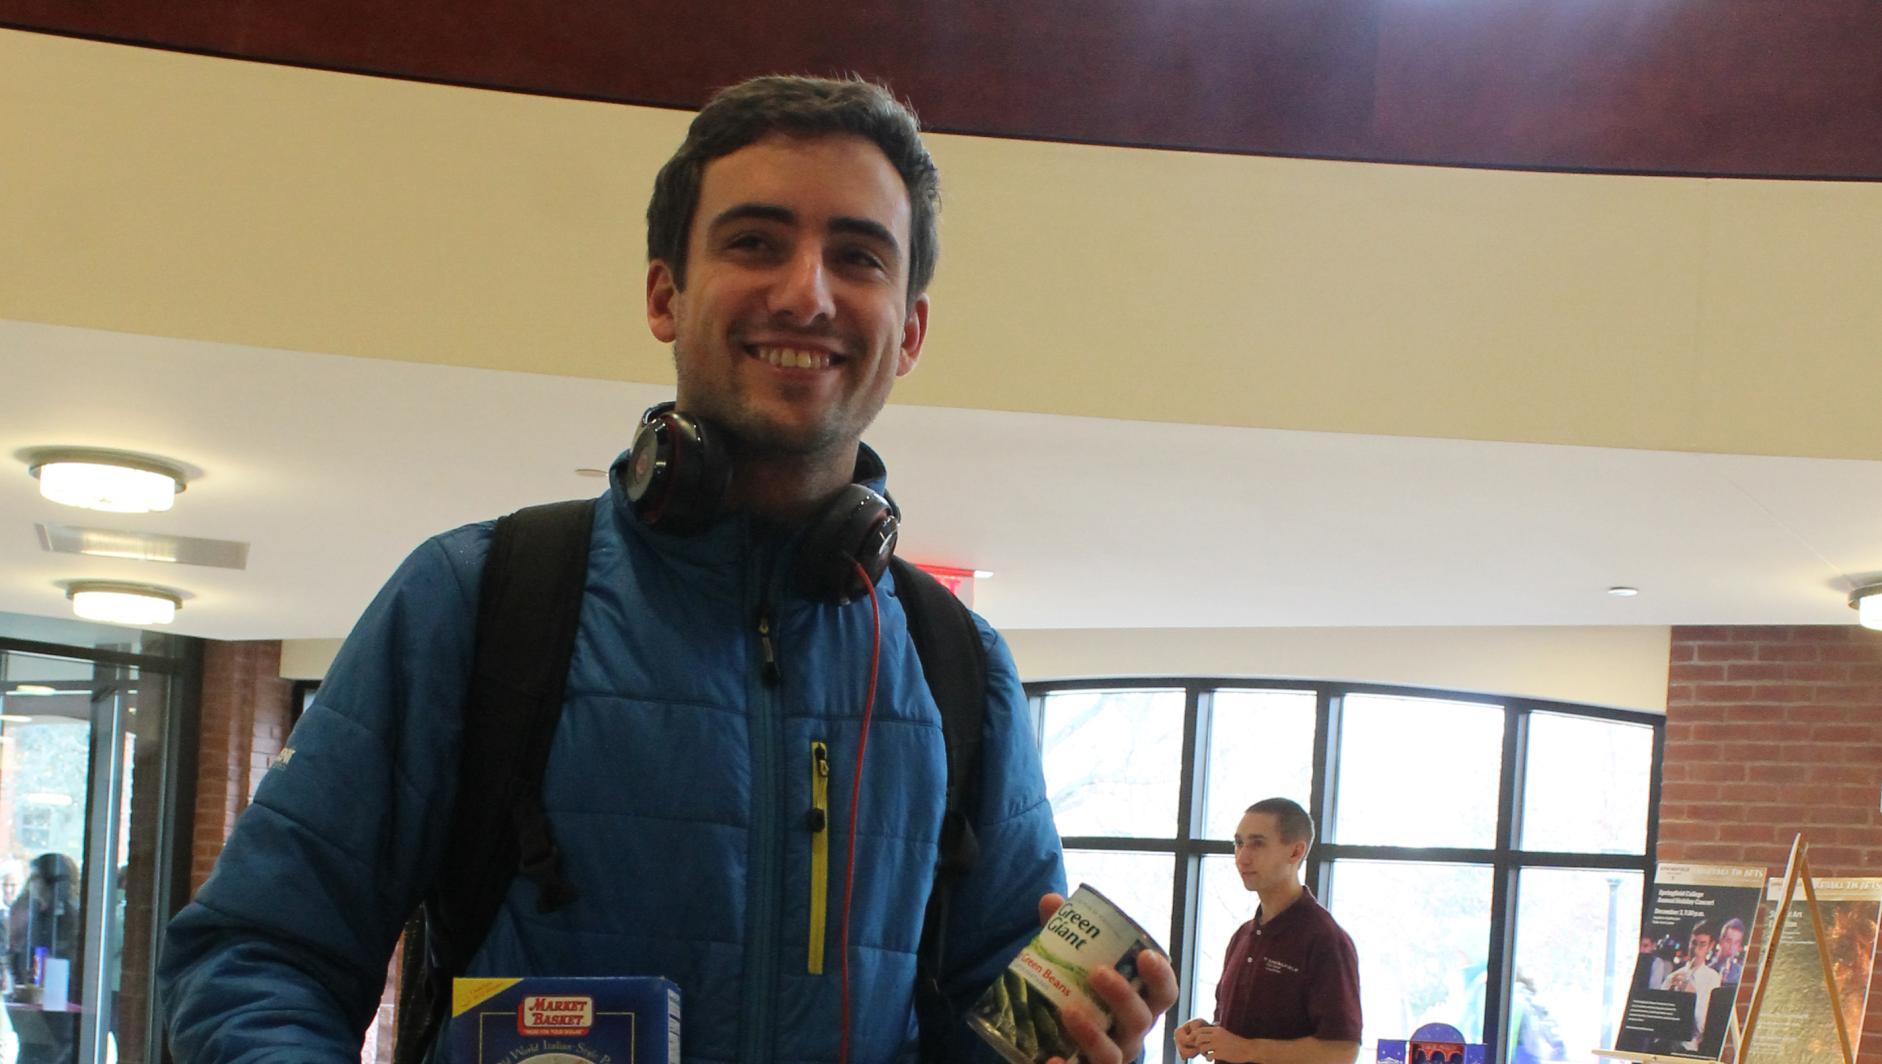 Student donating canned items at #GivingTuesday